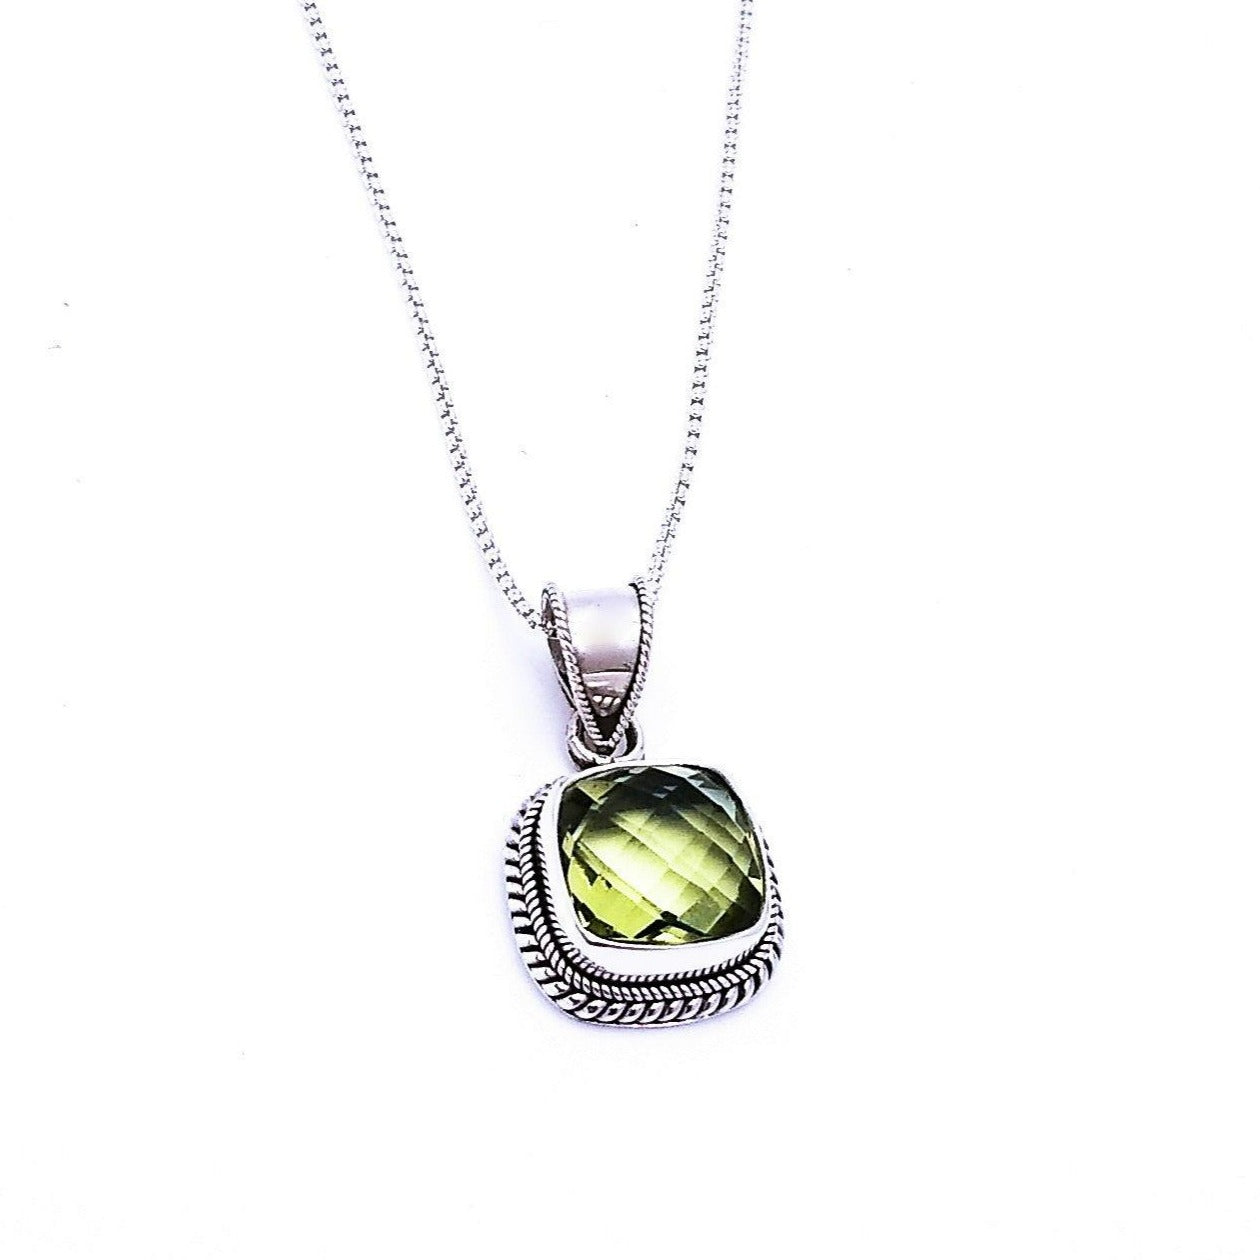 Sterling silver square-shaped pendant with green amethyst in the middle, lined with a woven rope pattern along the sides. Comes on an 18-inch chain.